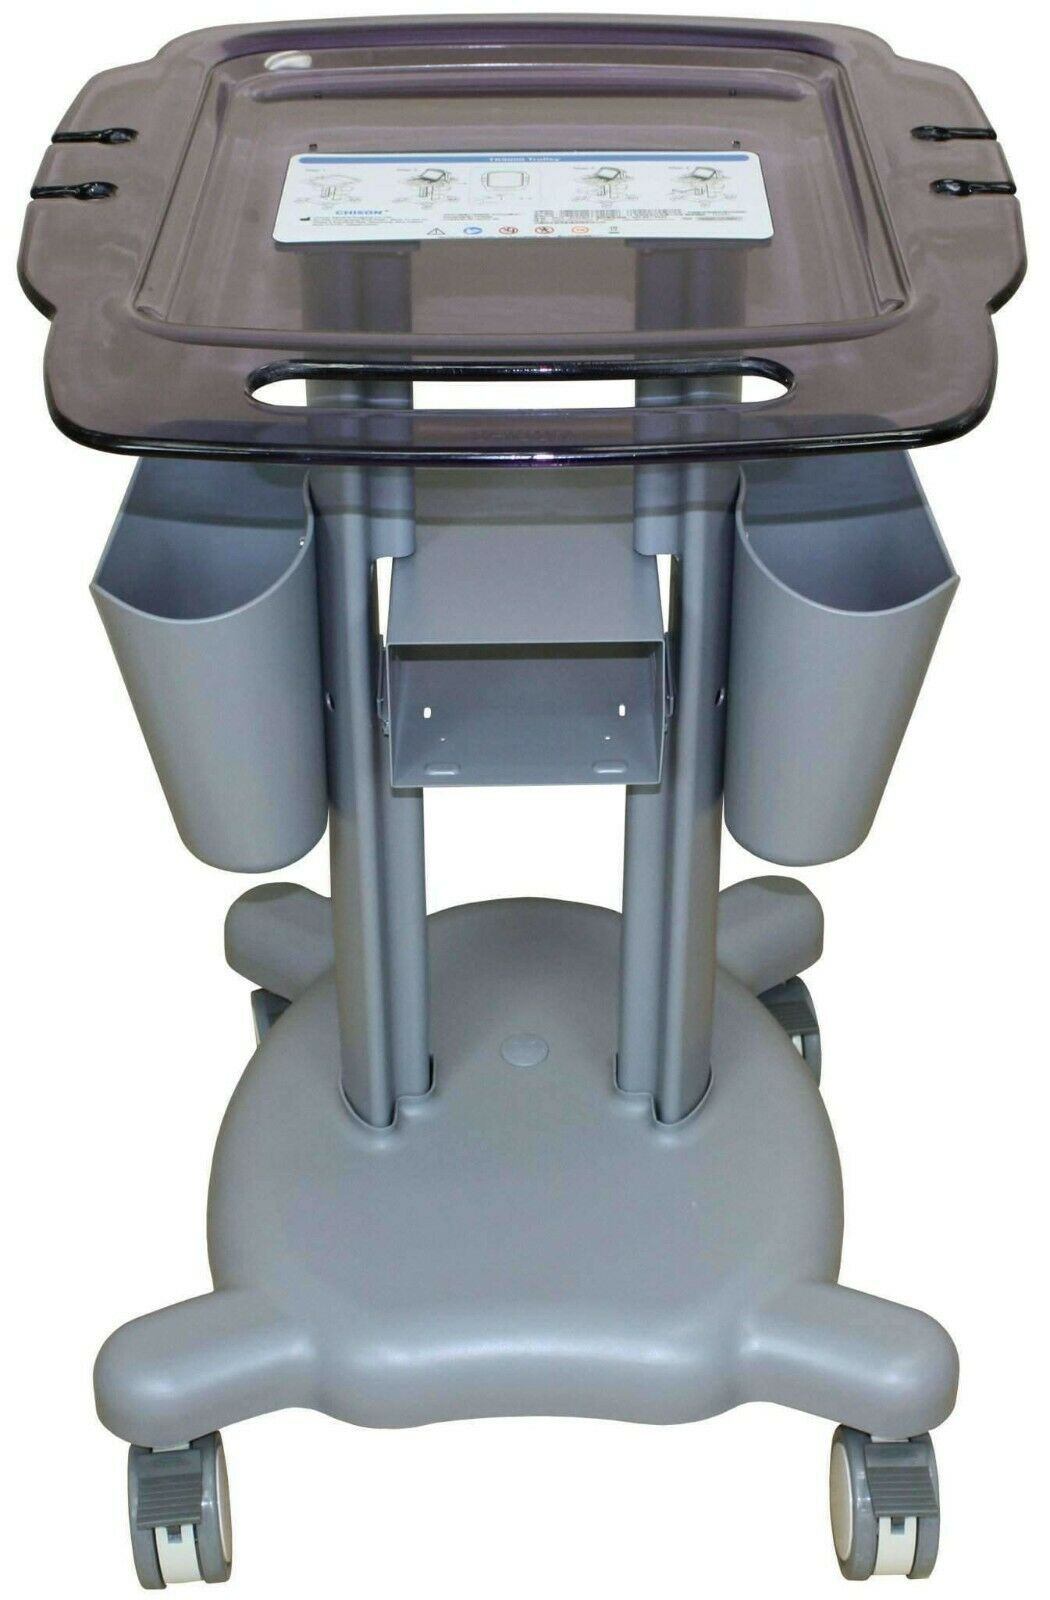 High Quality Mobile Cart Trolley for Portable Ultrasounds- Chison Tr-9000 DIAGNOSTIC ULTRASOUND MACHINES FOR SALE